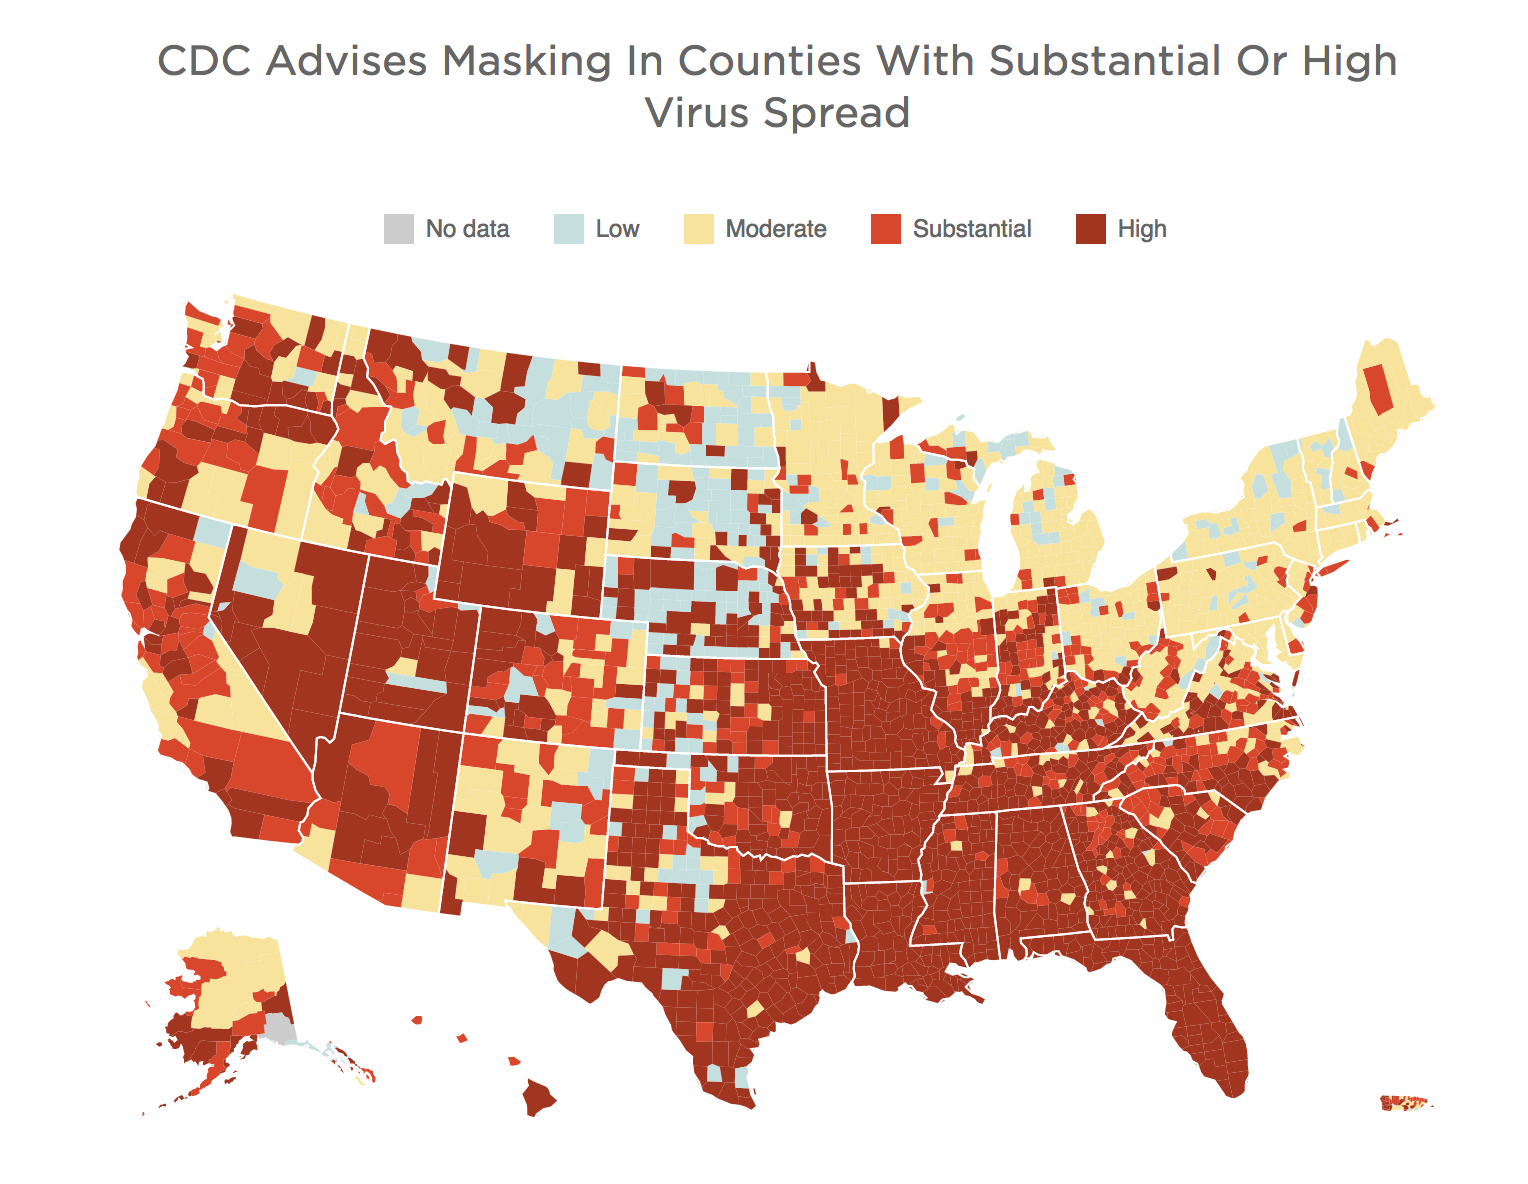 The CDC Covid hotspot map shows where vaccinated people should wear masks indoors